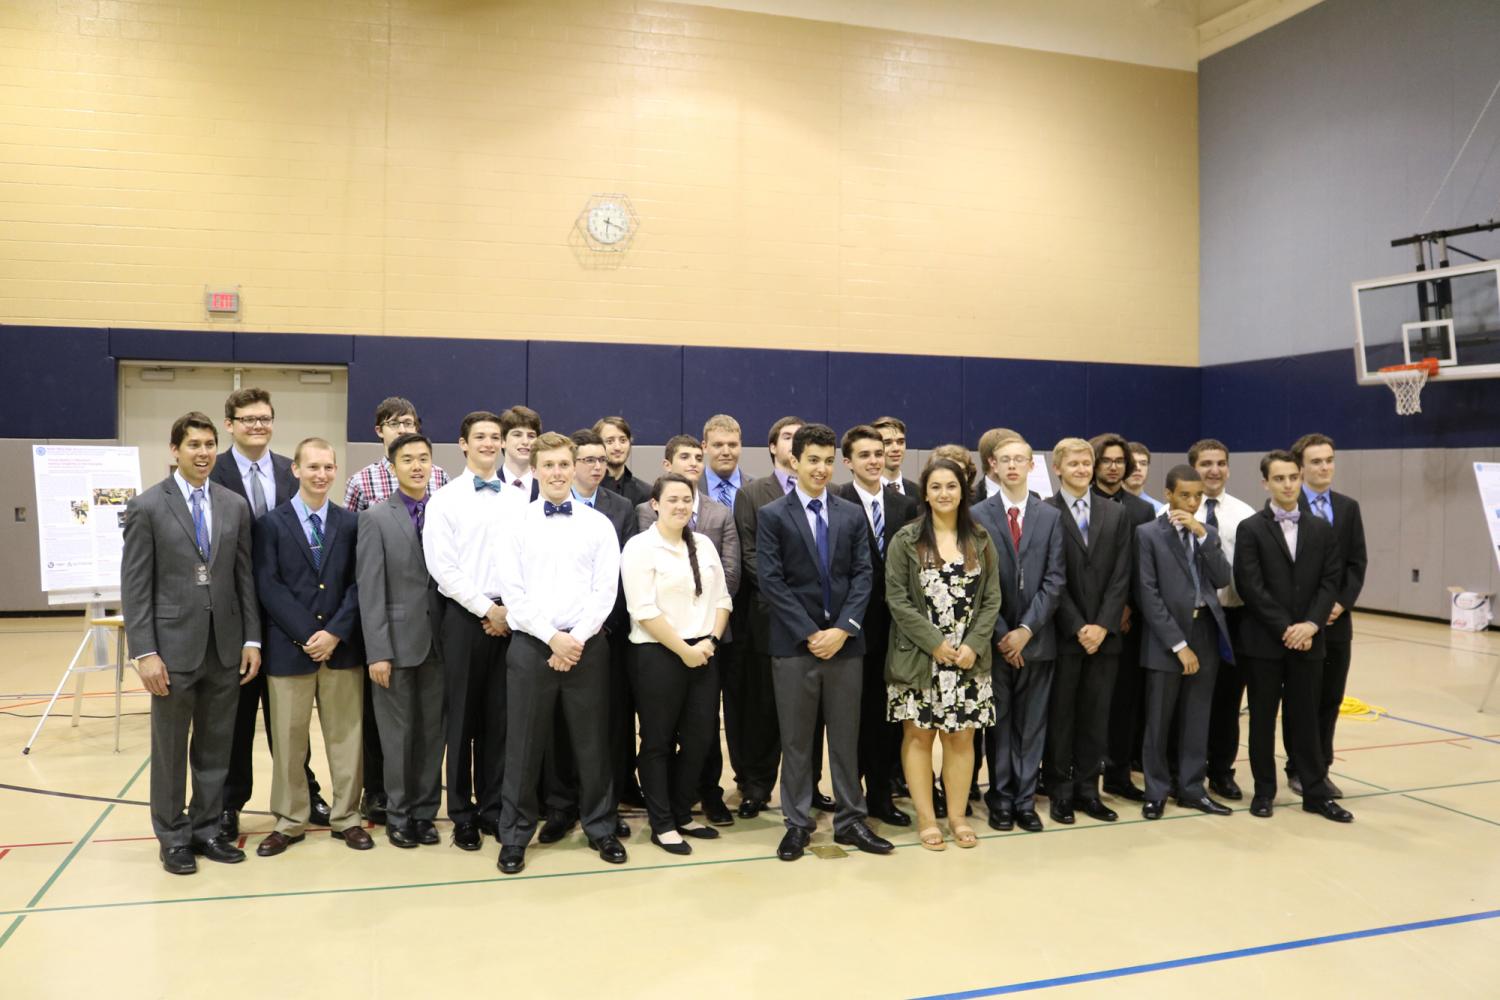 The group of students from the 12th Annual North Penn High School Engineering Academy Nanotechnology and Engineering Symposium pose for a photo at the end of the presentation on May 30th.